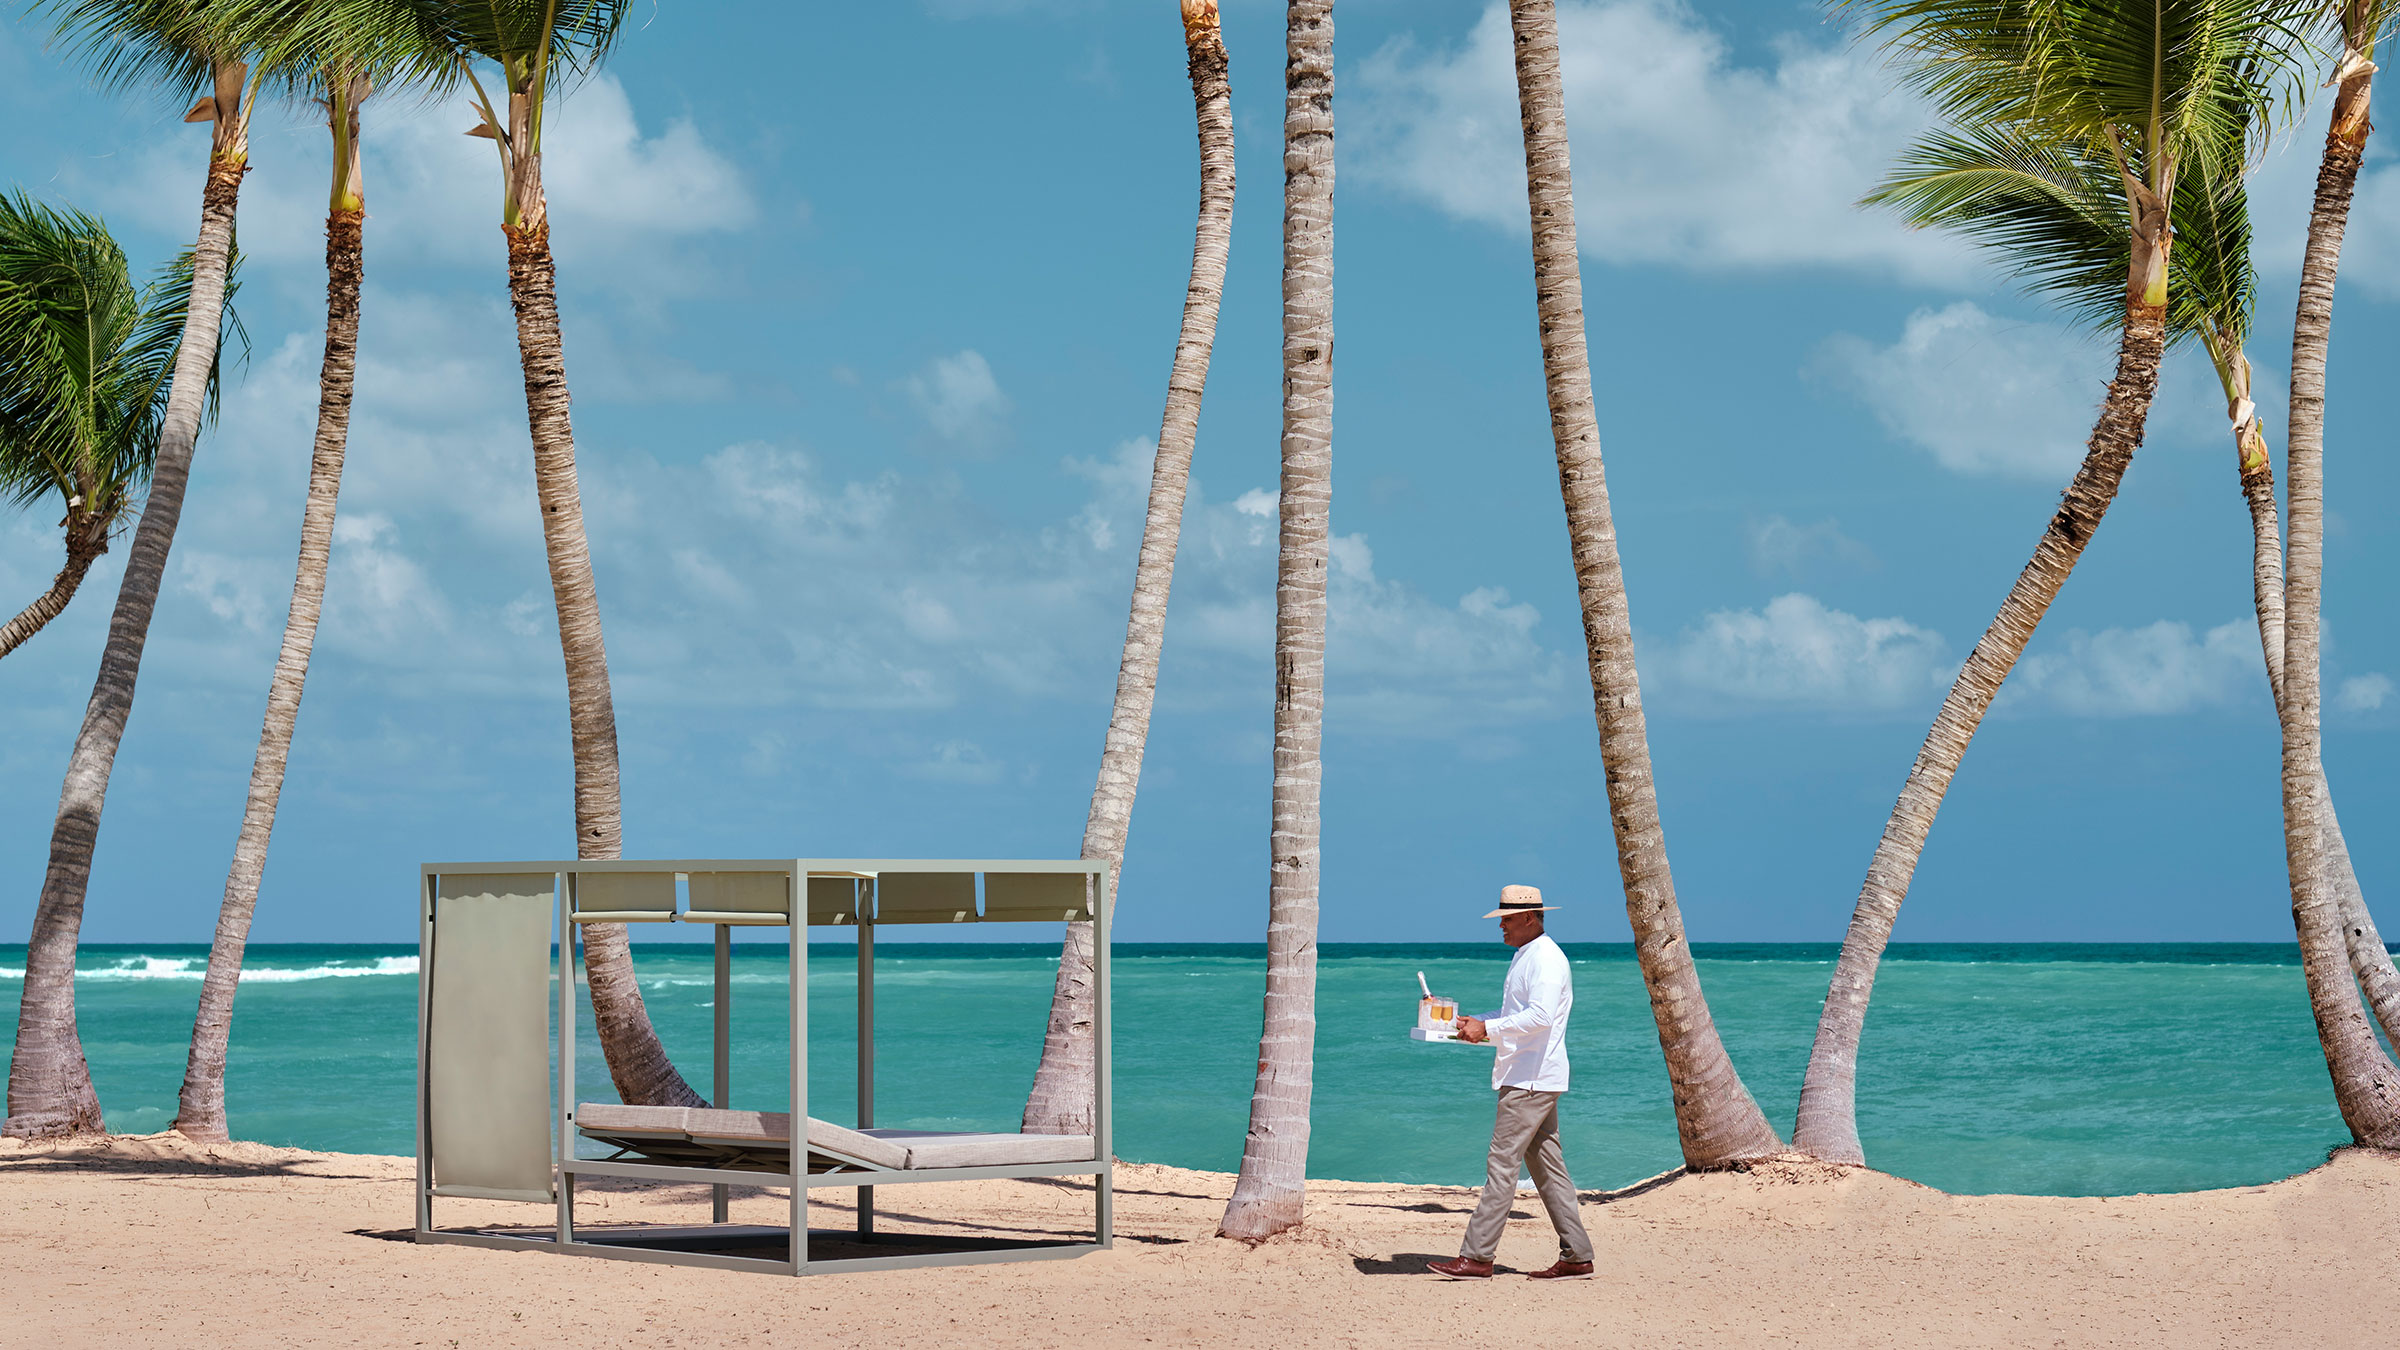 Bespoke service by the beach in Finest Punta Cana